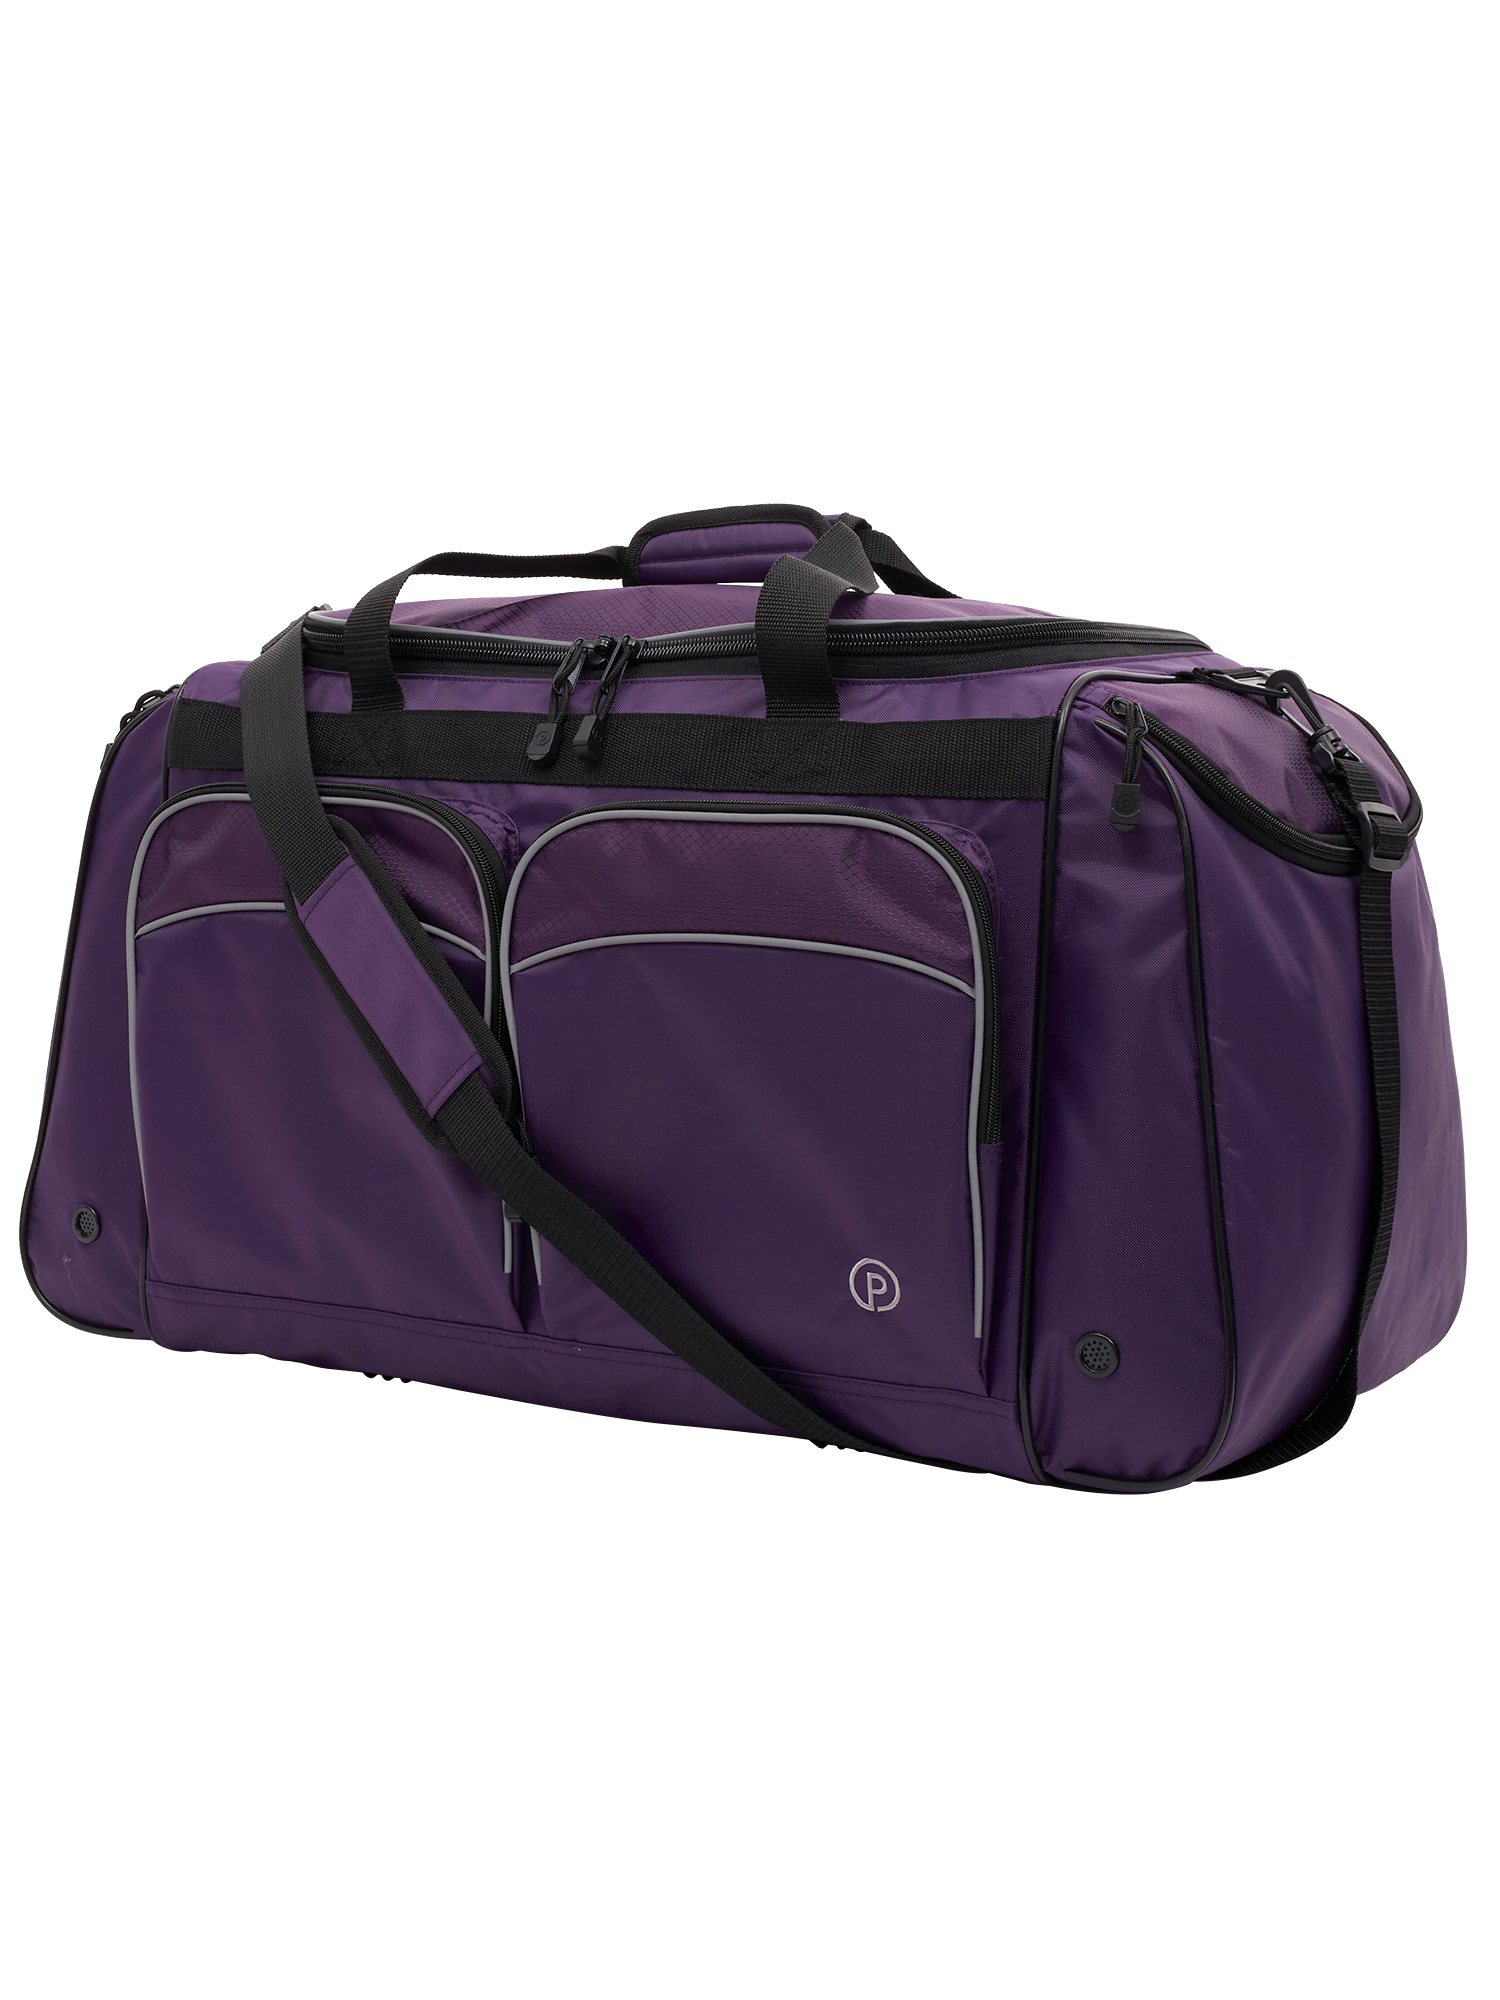 Protege 28" Polyester Sport Travel Duffel Bag, Purple - image 2 of 8